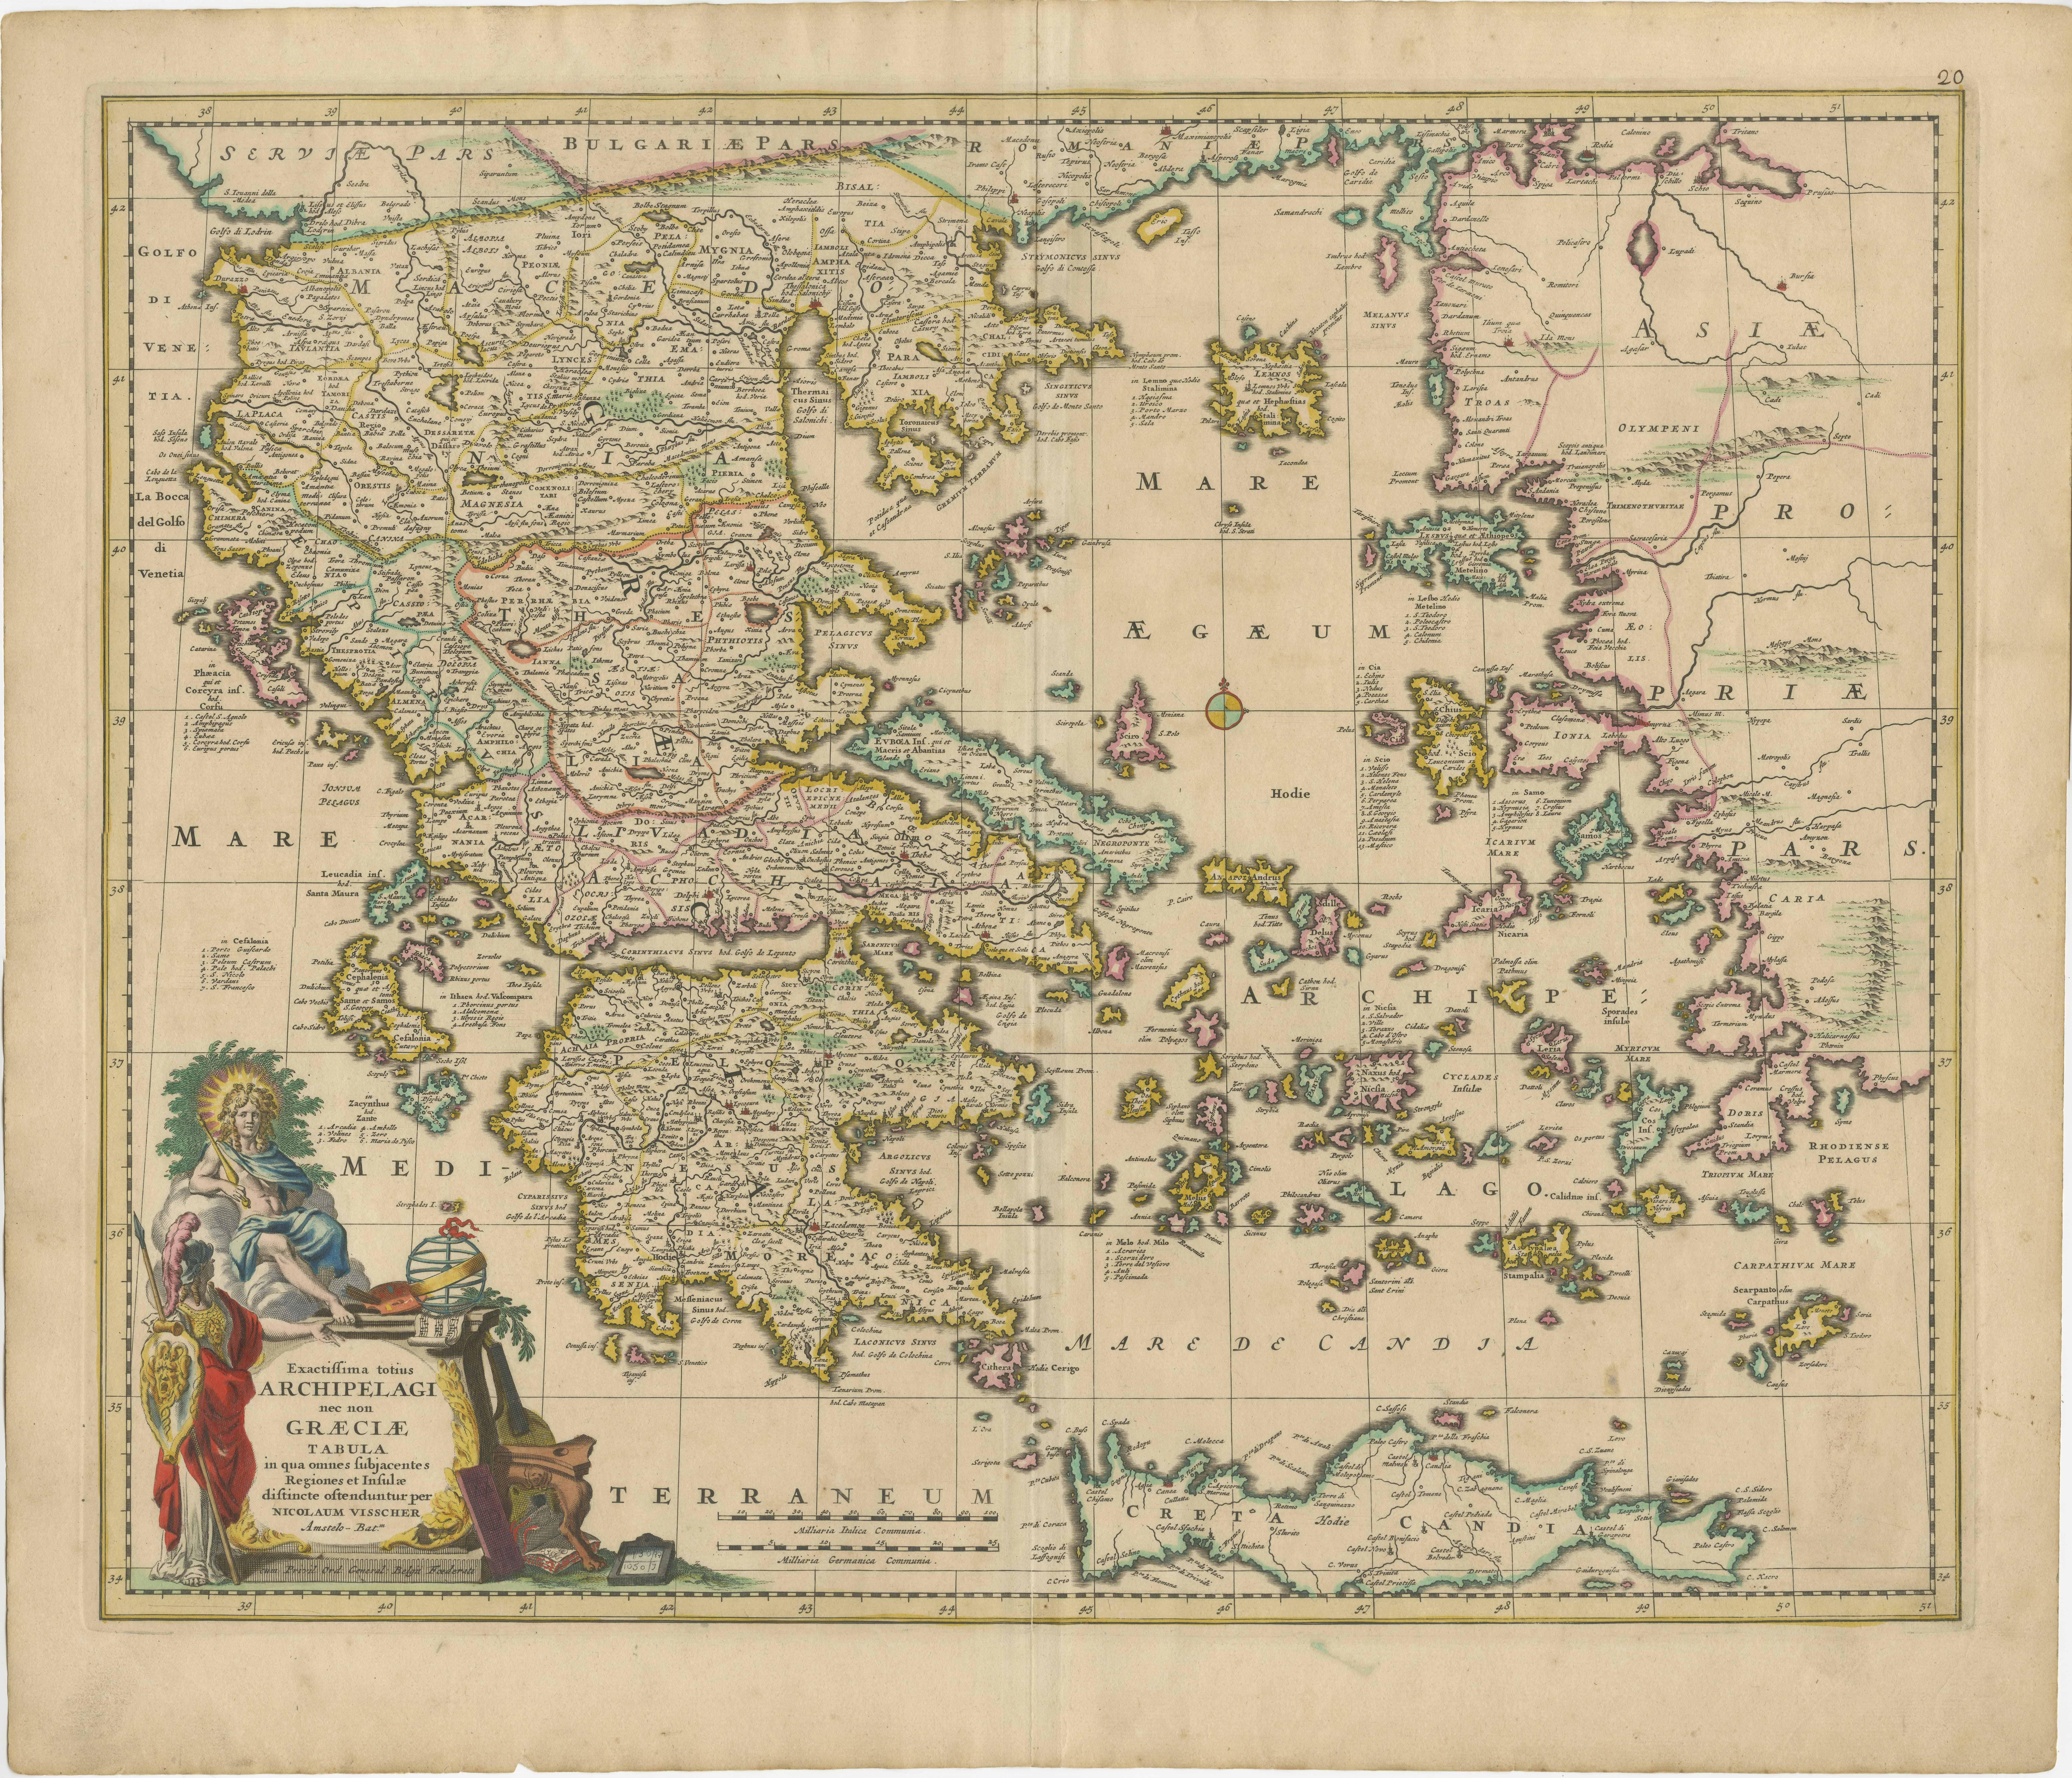 Original antique map titled 'Exactissima totius Archipelagi nec non Graeciae Tabula'. Visscher's scarce map of the Greek Islands, the Aegean, Crete and part of Asia Minor. Published circa 1680. 

Among the many great Dutch map publishers active in